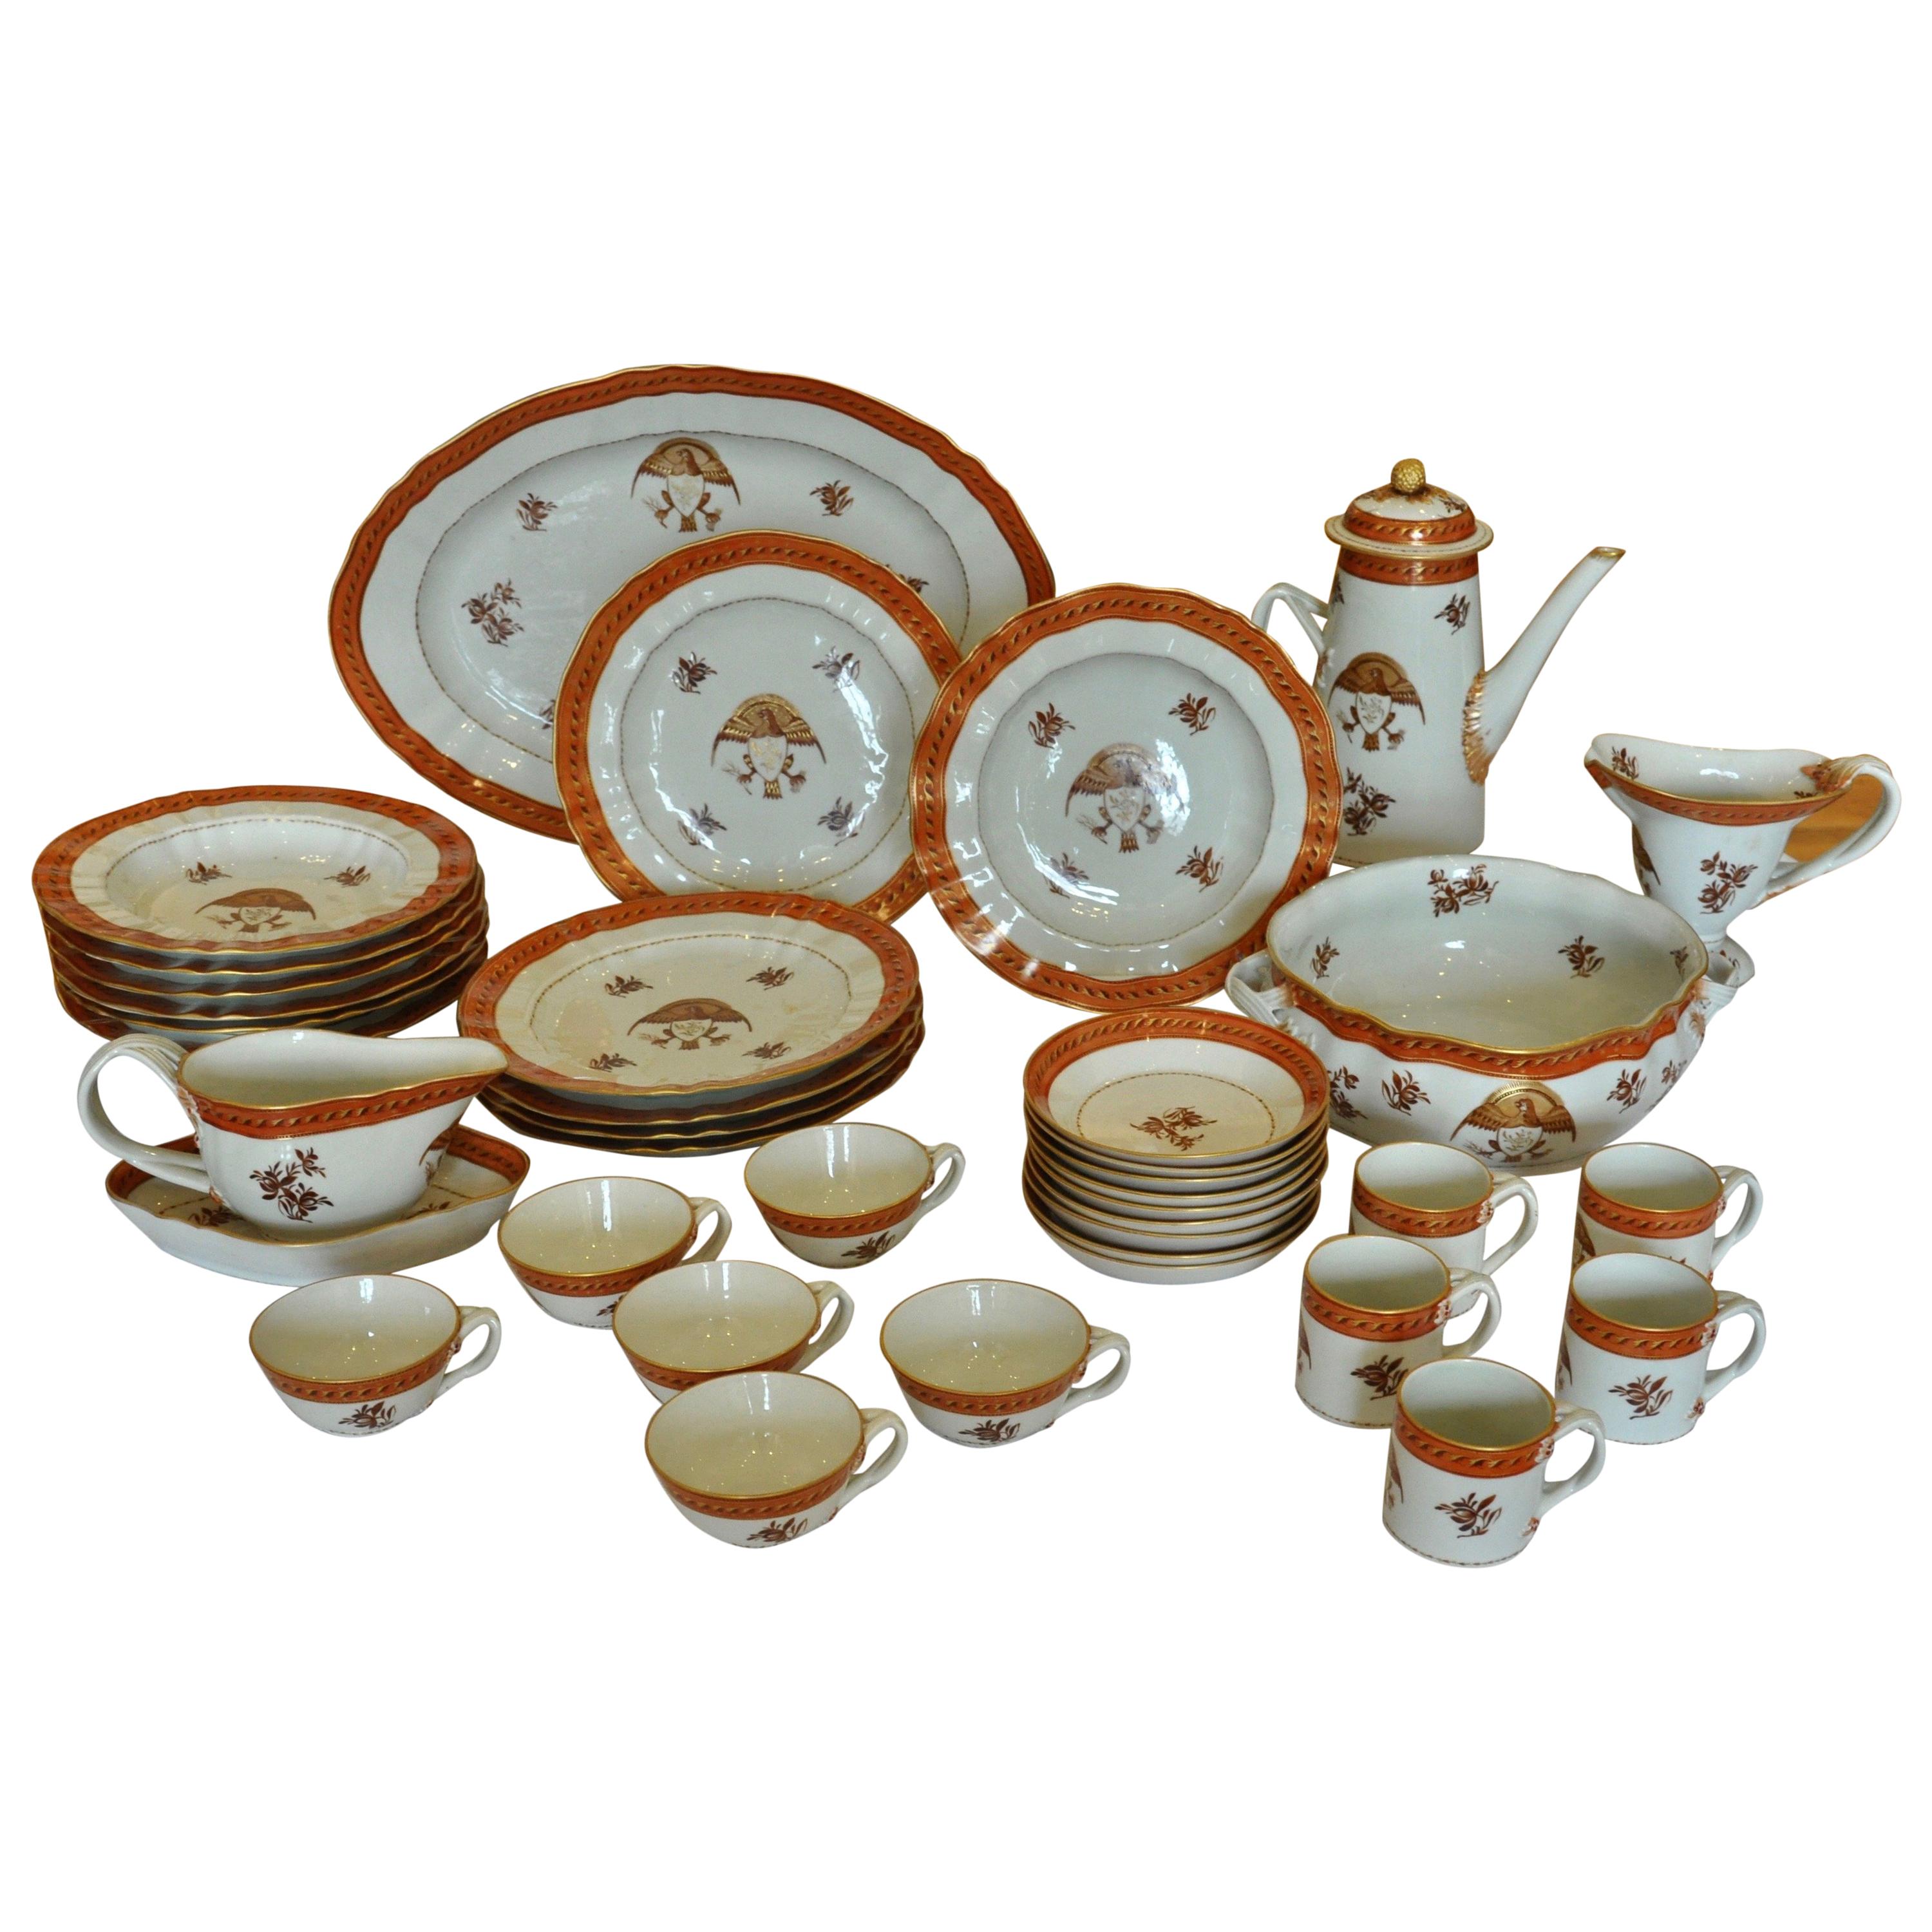 Armorial Service of Samson Chinese Export Porcelain for the American Market